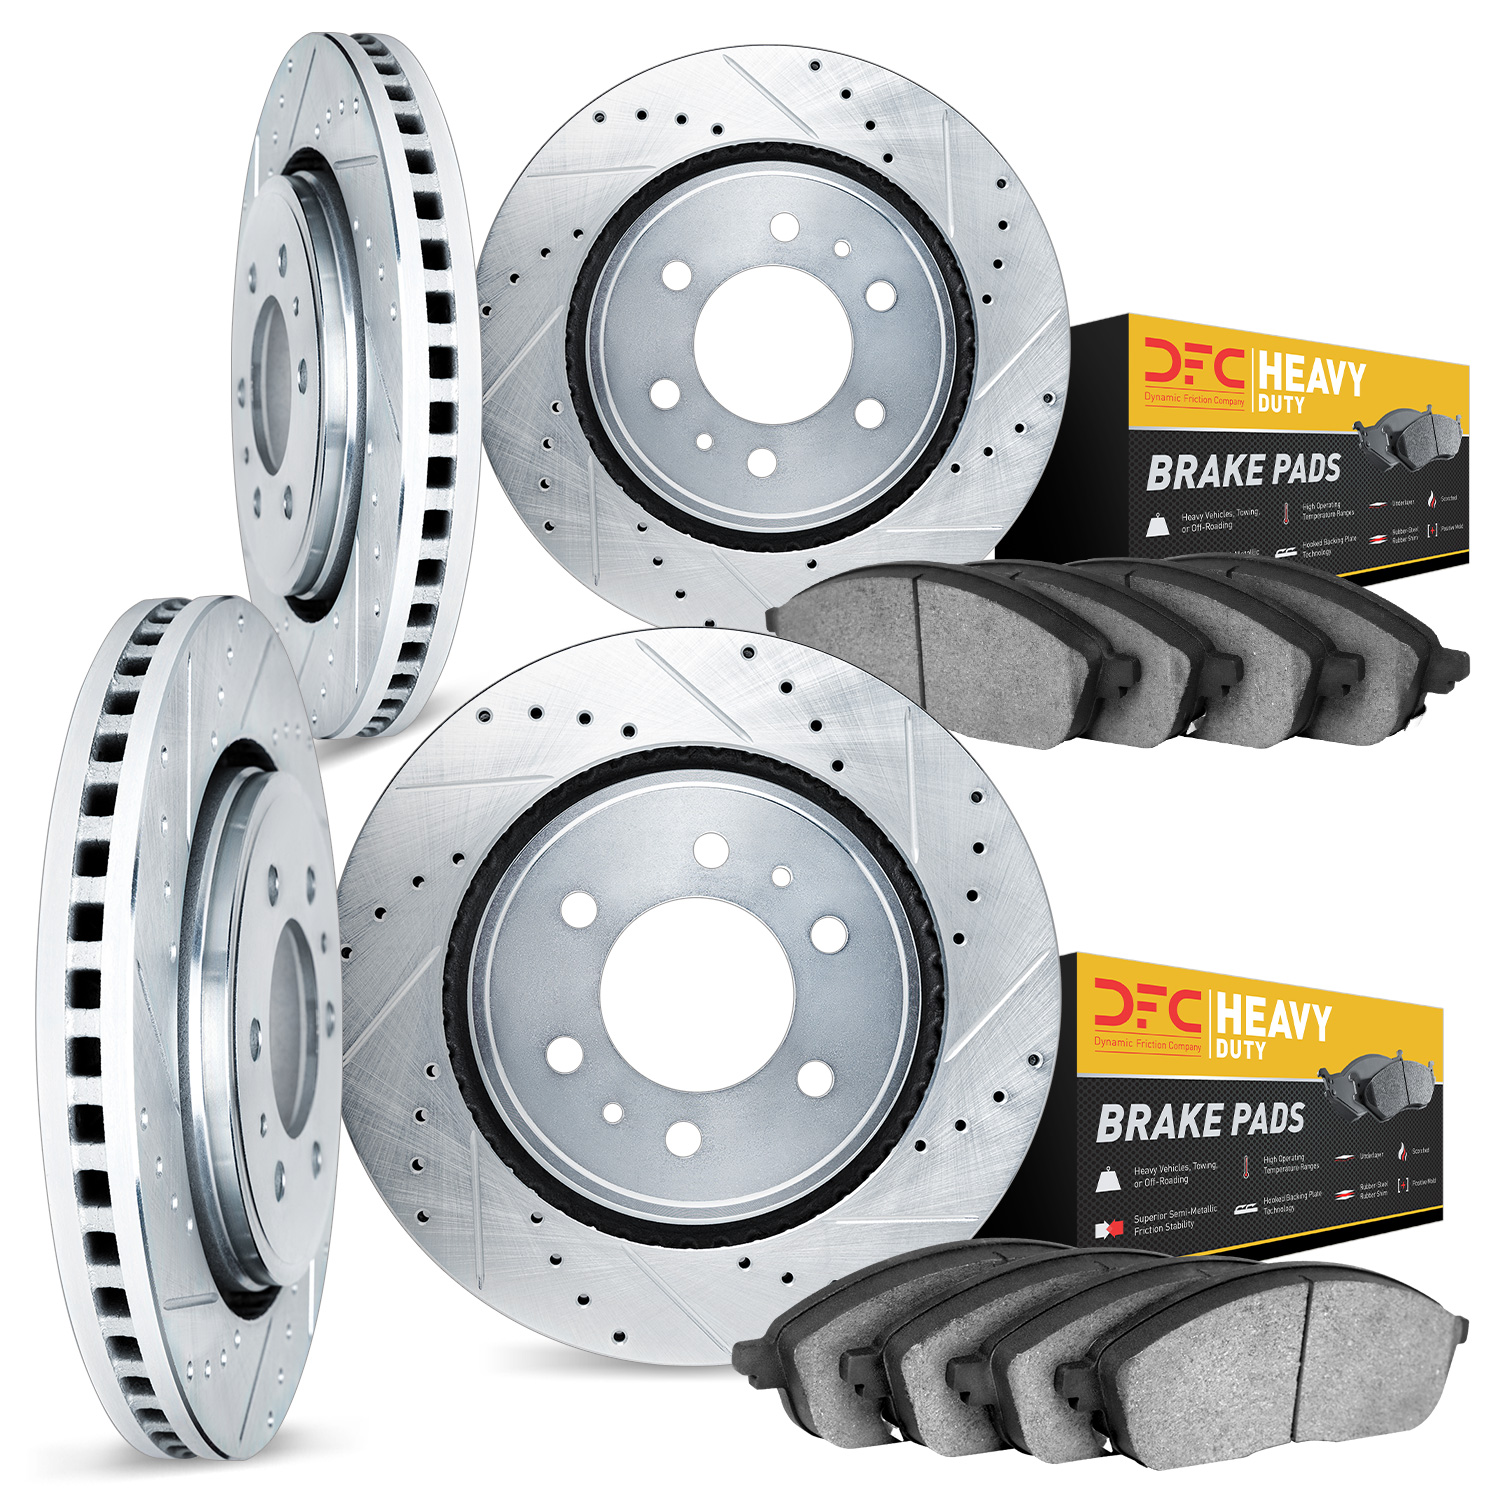 7204-67002 Drilled/Slotted Rotors w/Heavy-Duty Brake Pads Kit [Silver], Fits Select Infiniti/Nissan, Position: Front and Rear